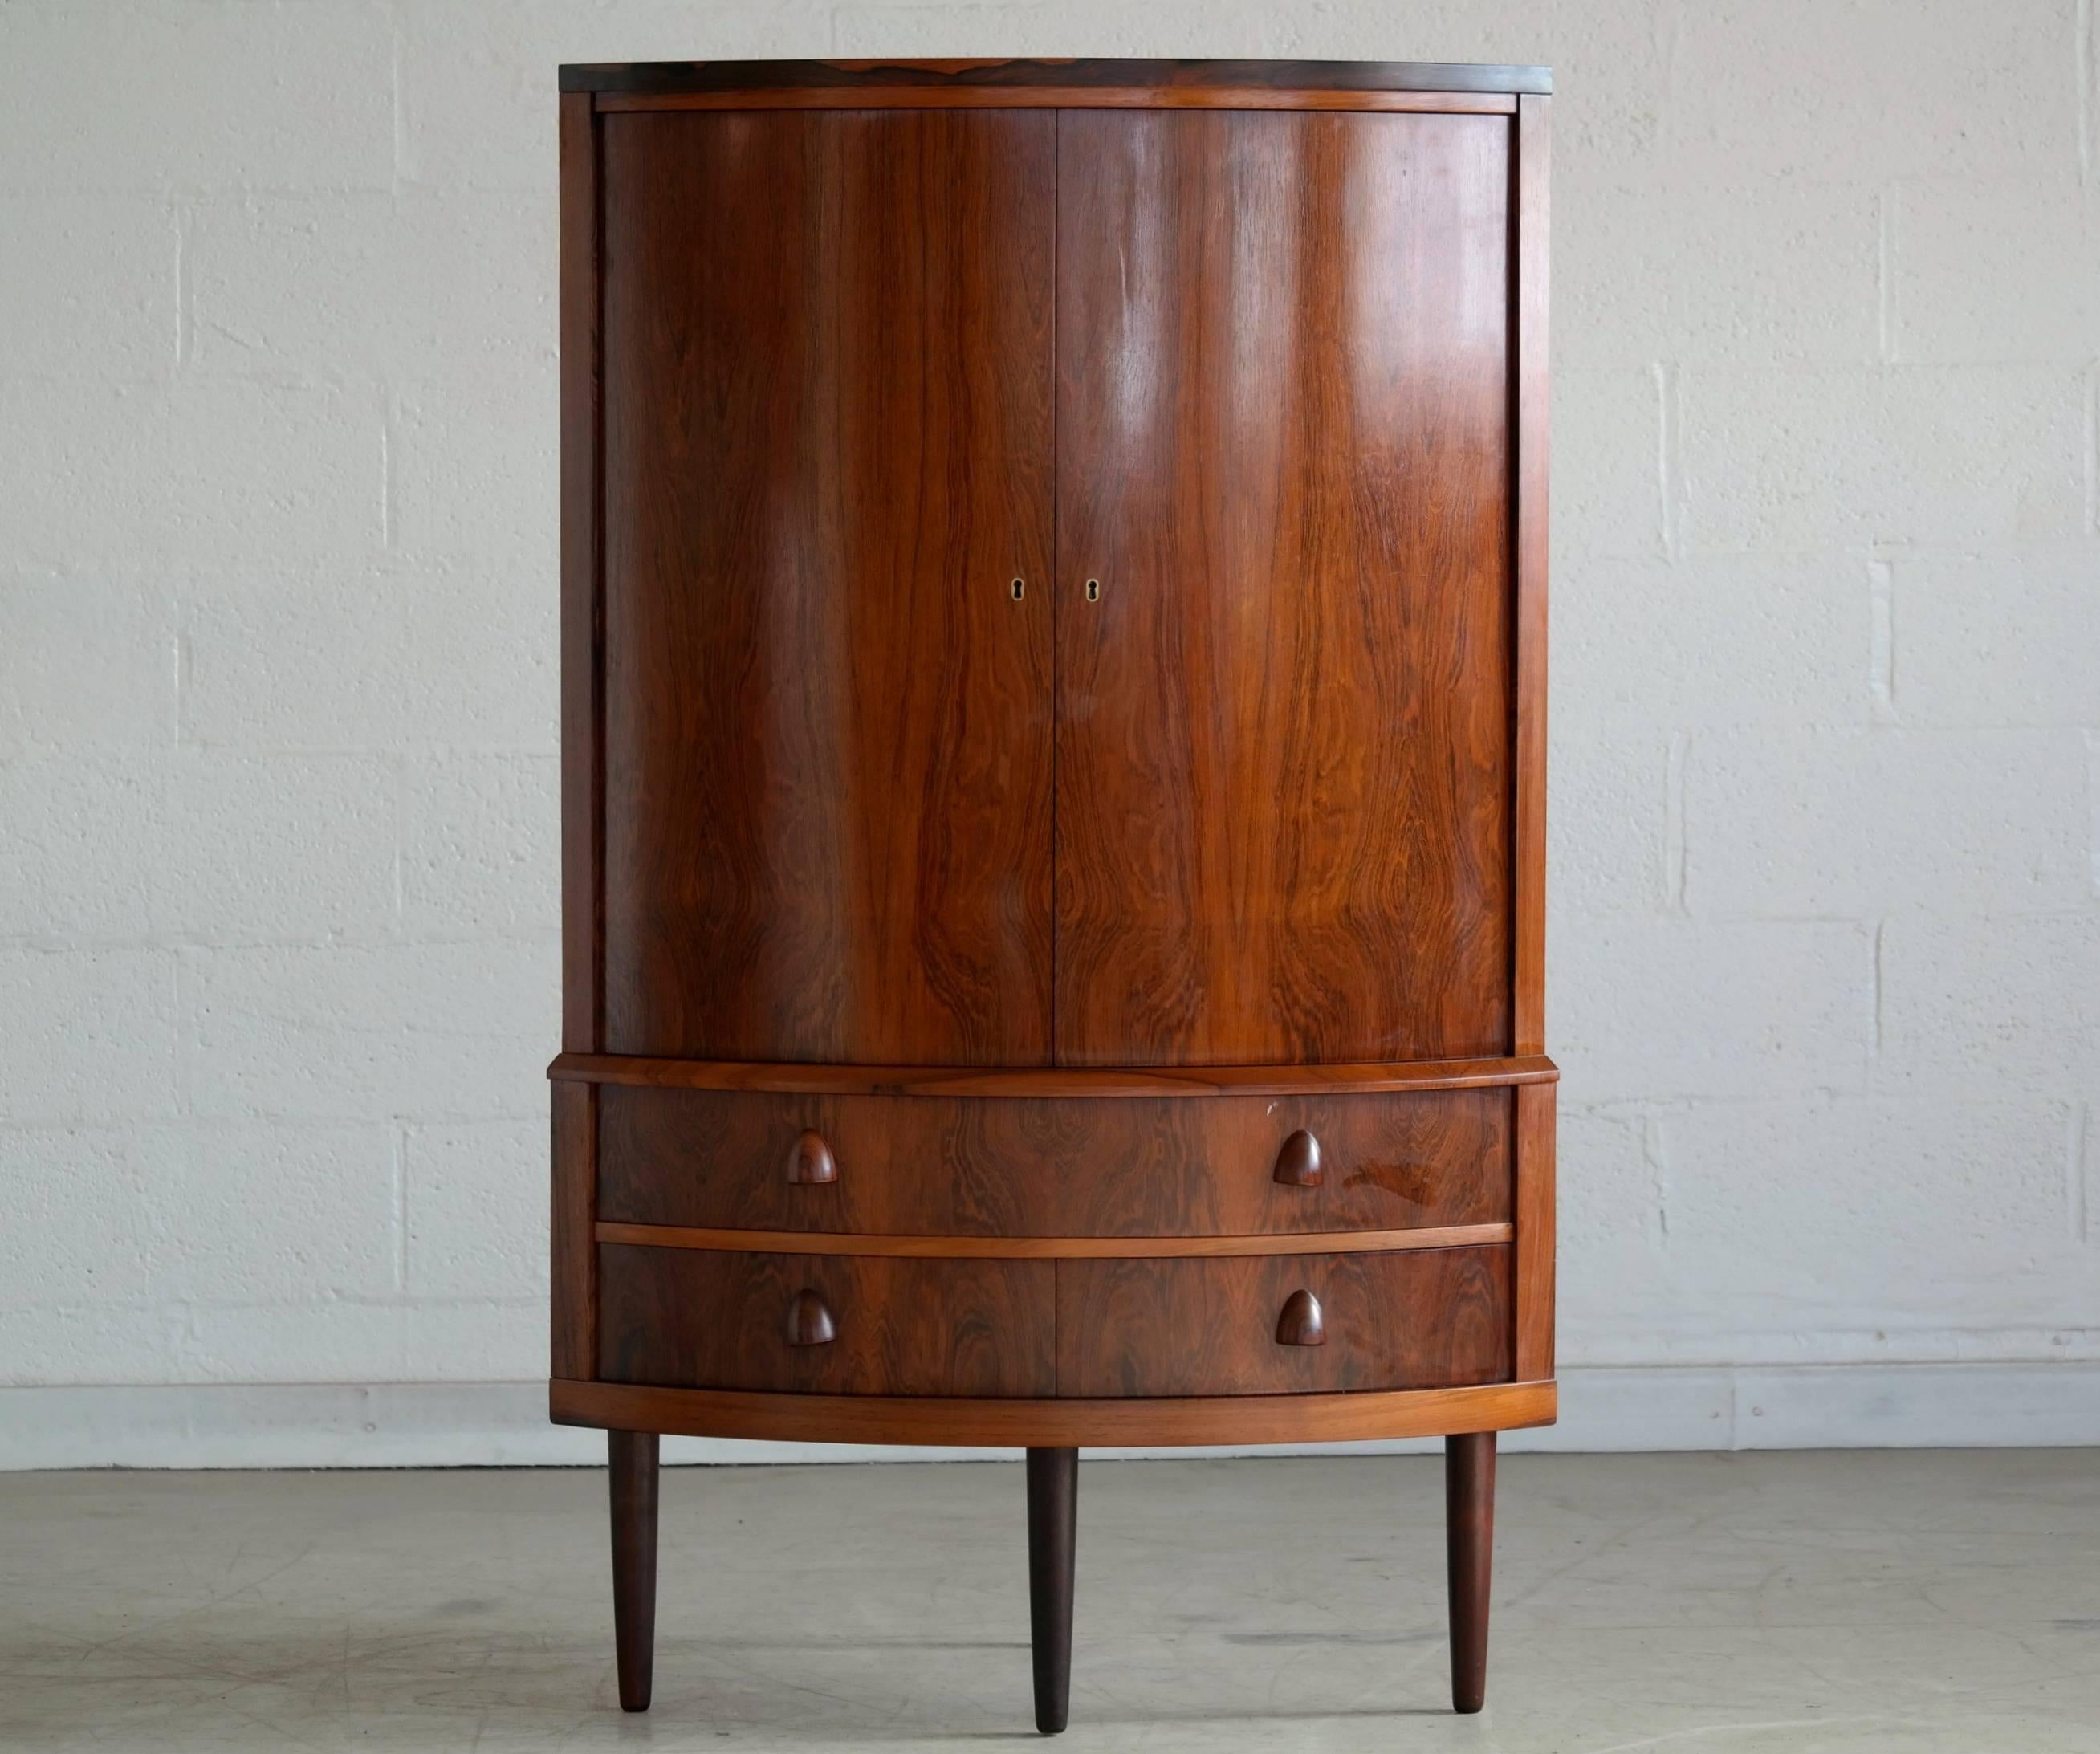 Fantastic rosewood corner cabinet attributed to Frode Holm. Rosewood veneer with beautiful grain. Solid edges and carved pulls. Elegant yet sturdy construction. High quality piece.